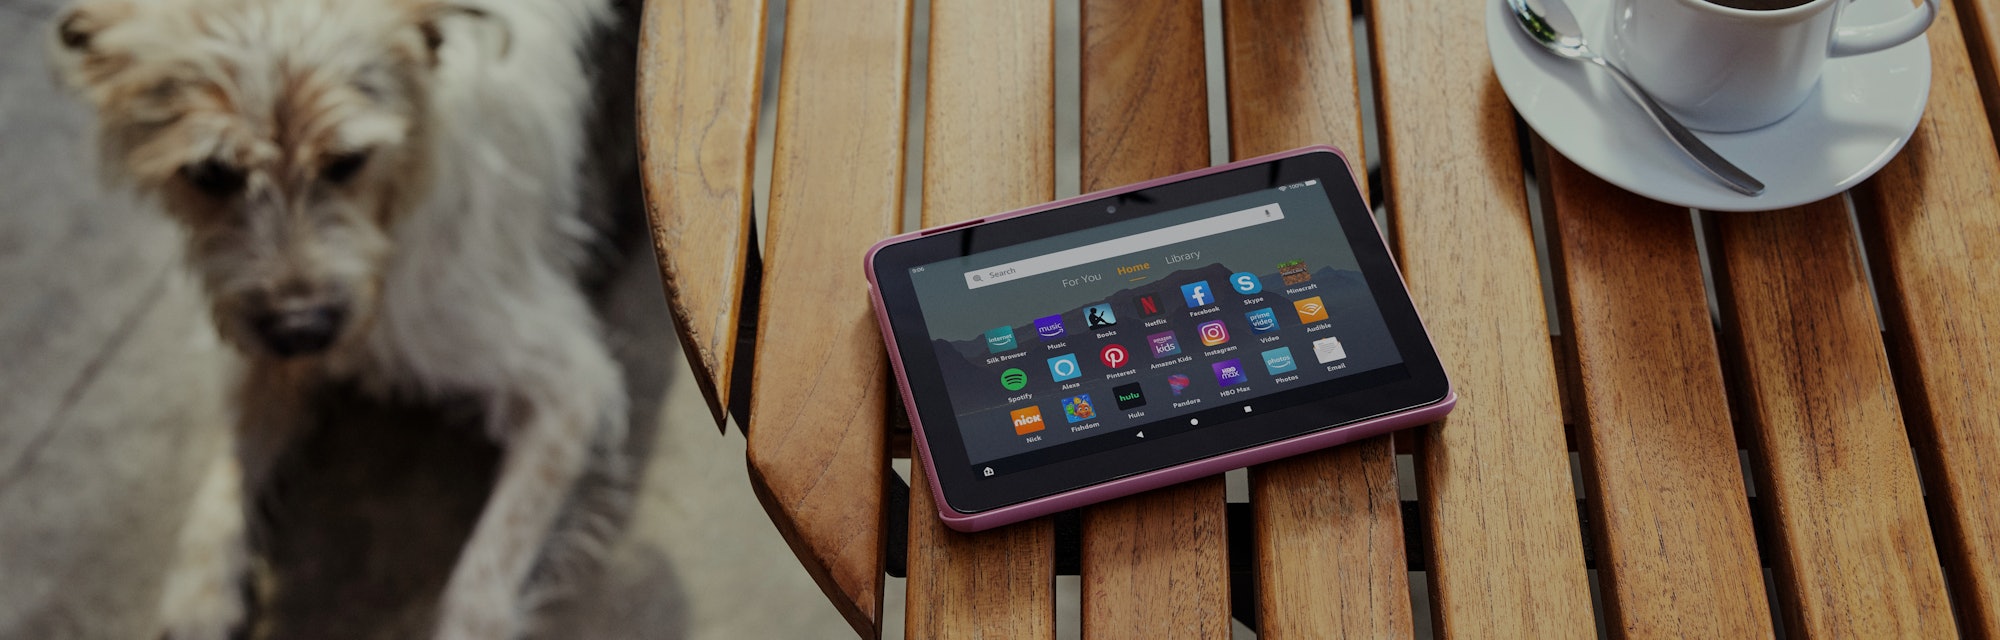 The new Fire 7 tablet